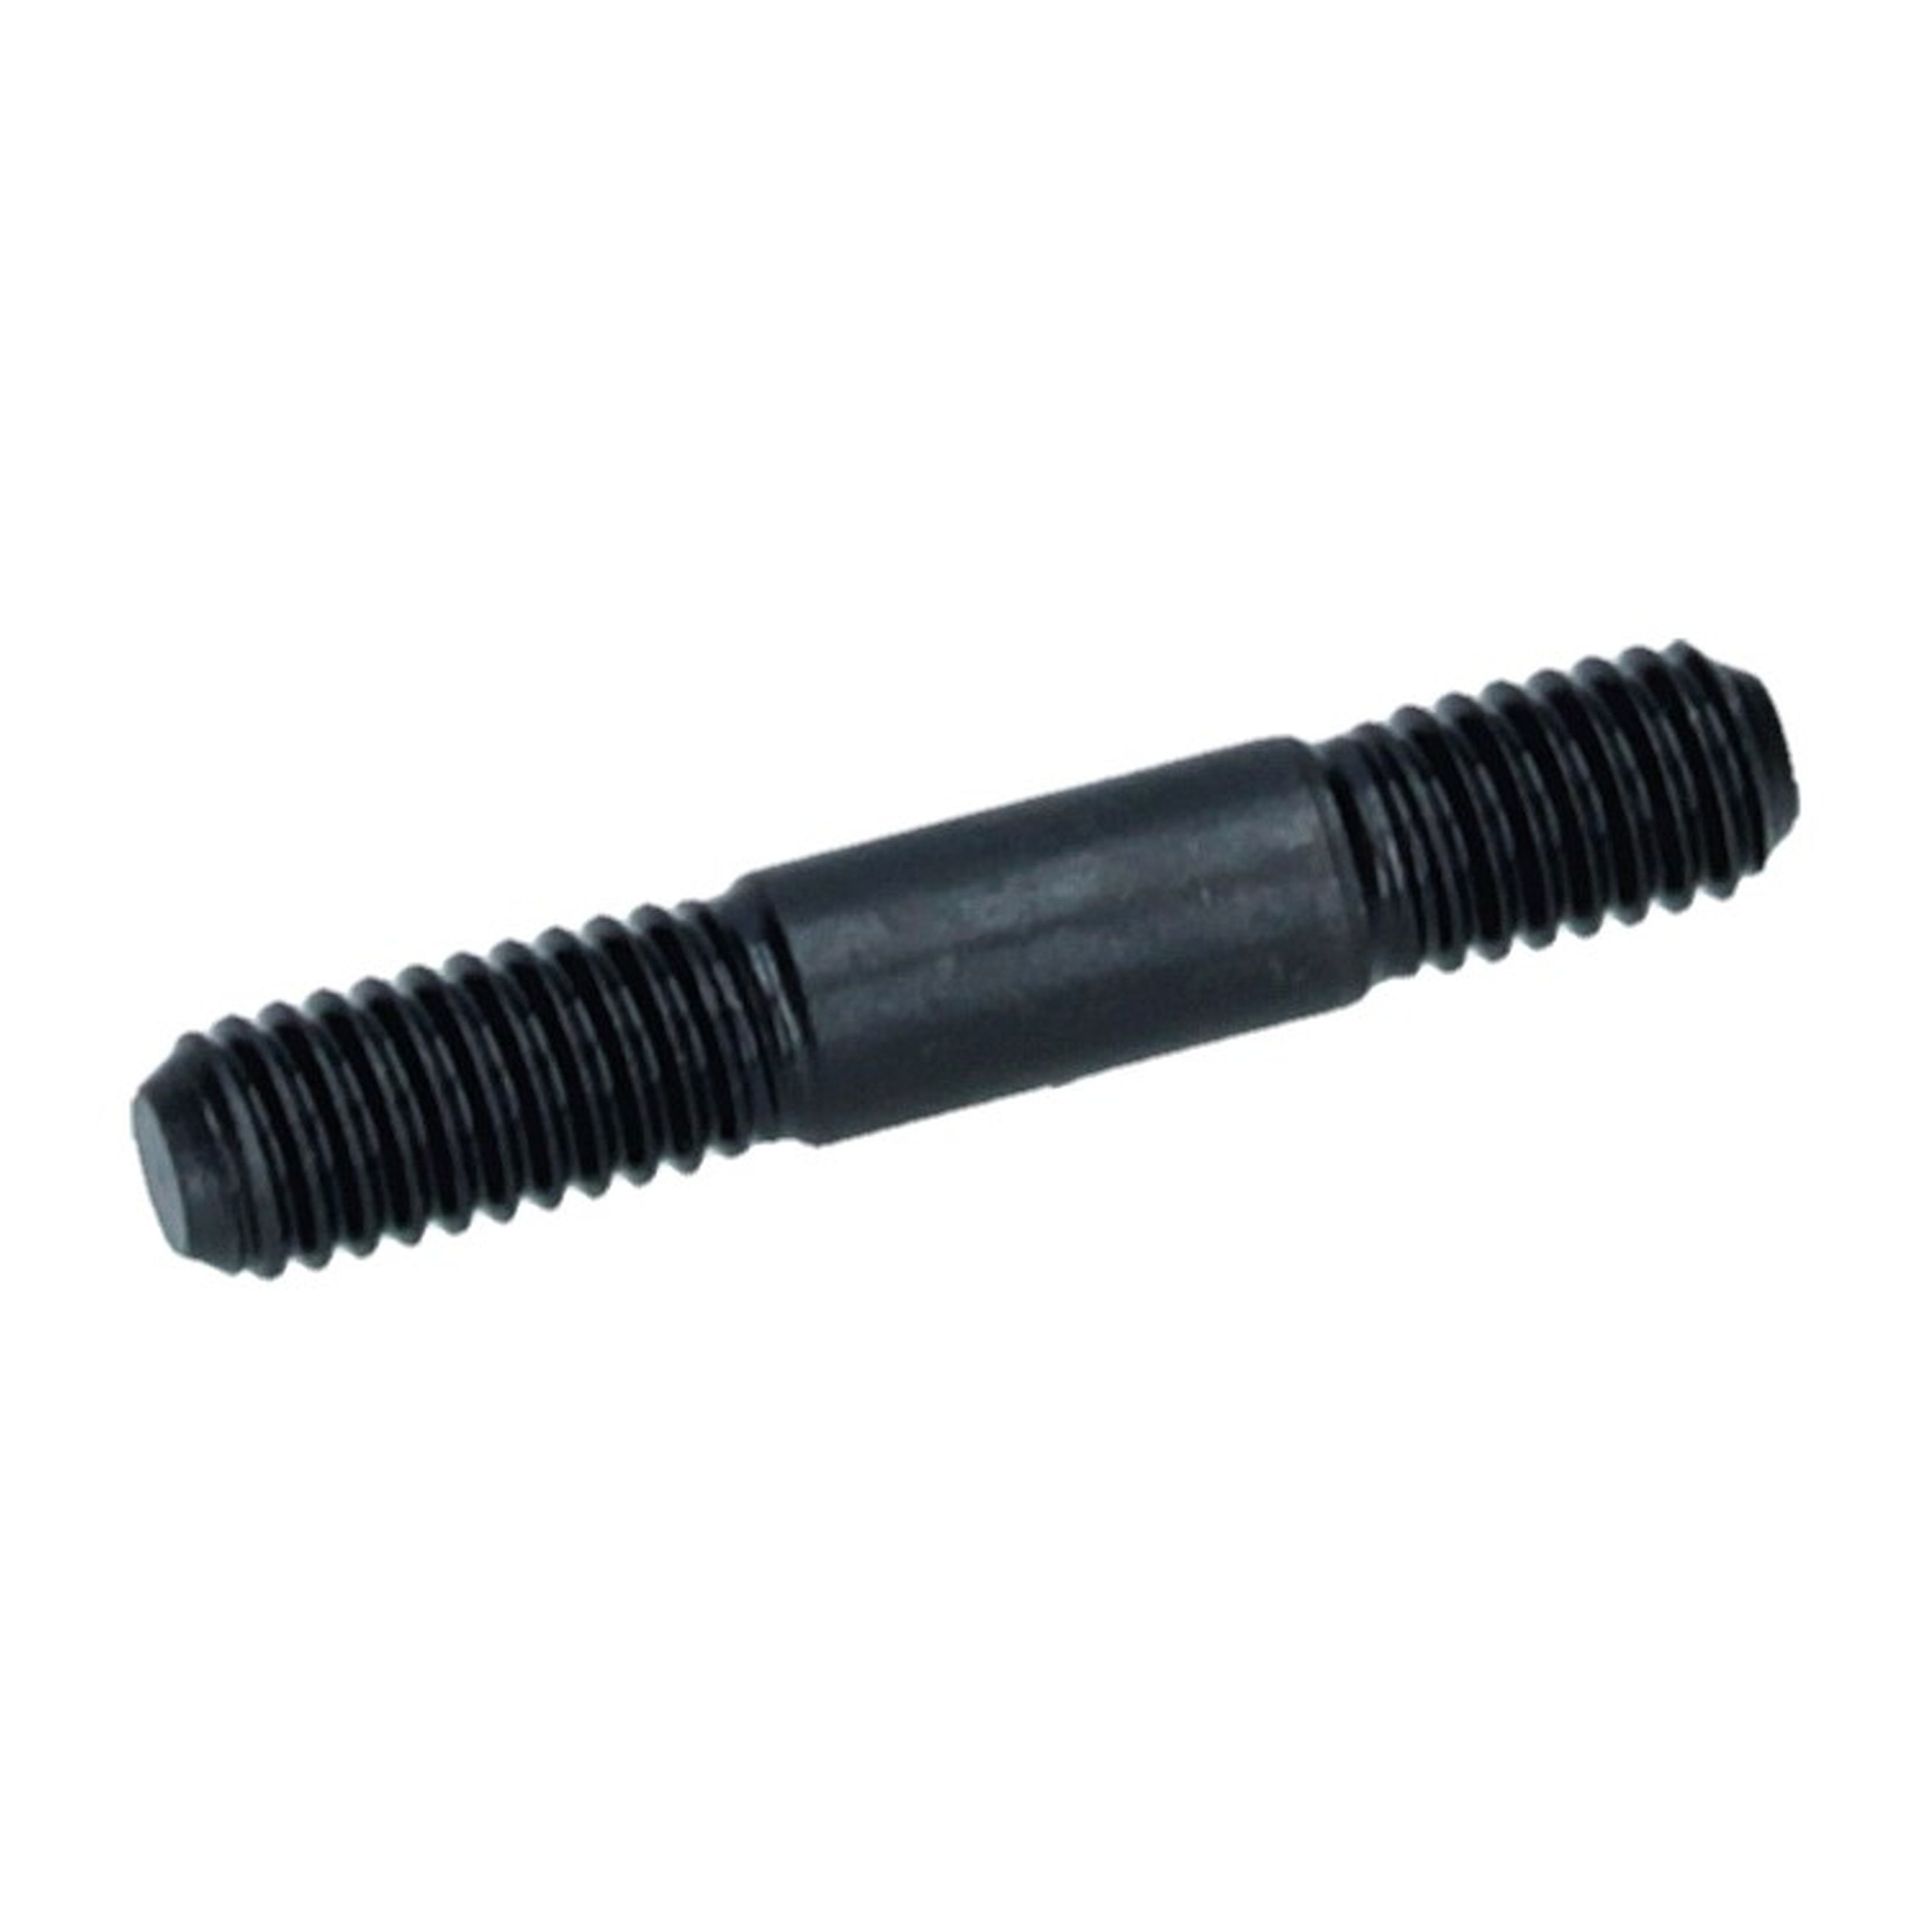 Timing Chain Cover Stud Short (M6x35)